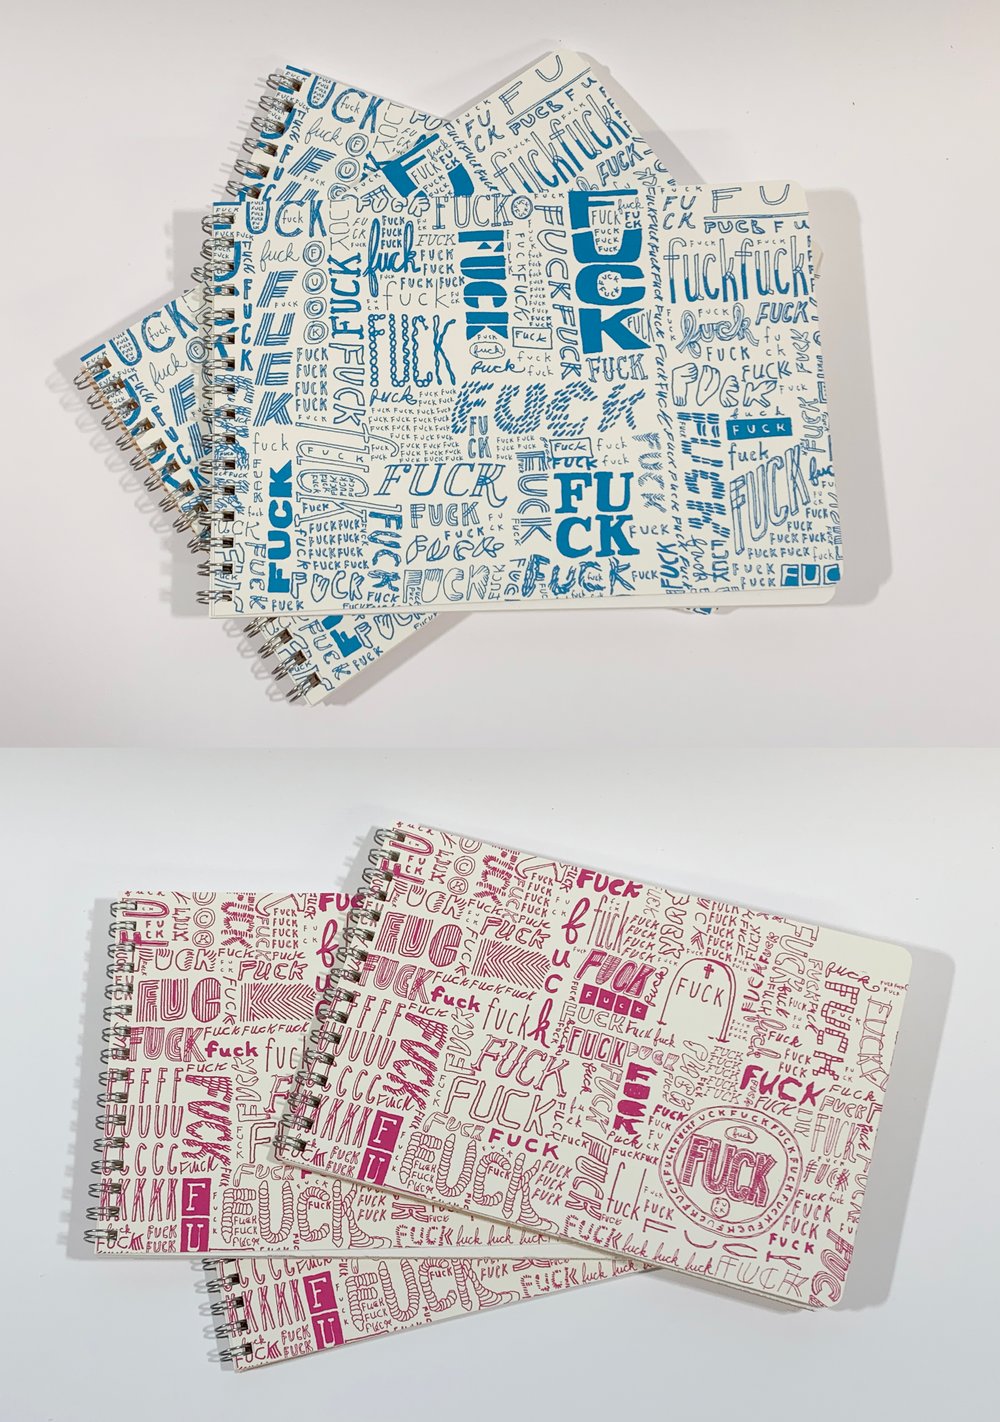 The F-BOMB Version of the Official Landland Test Print Notebook and/or Sketchbook